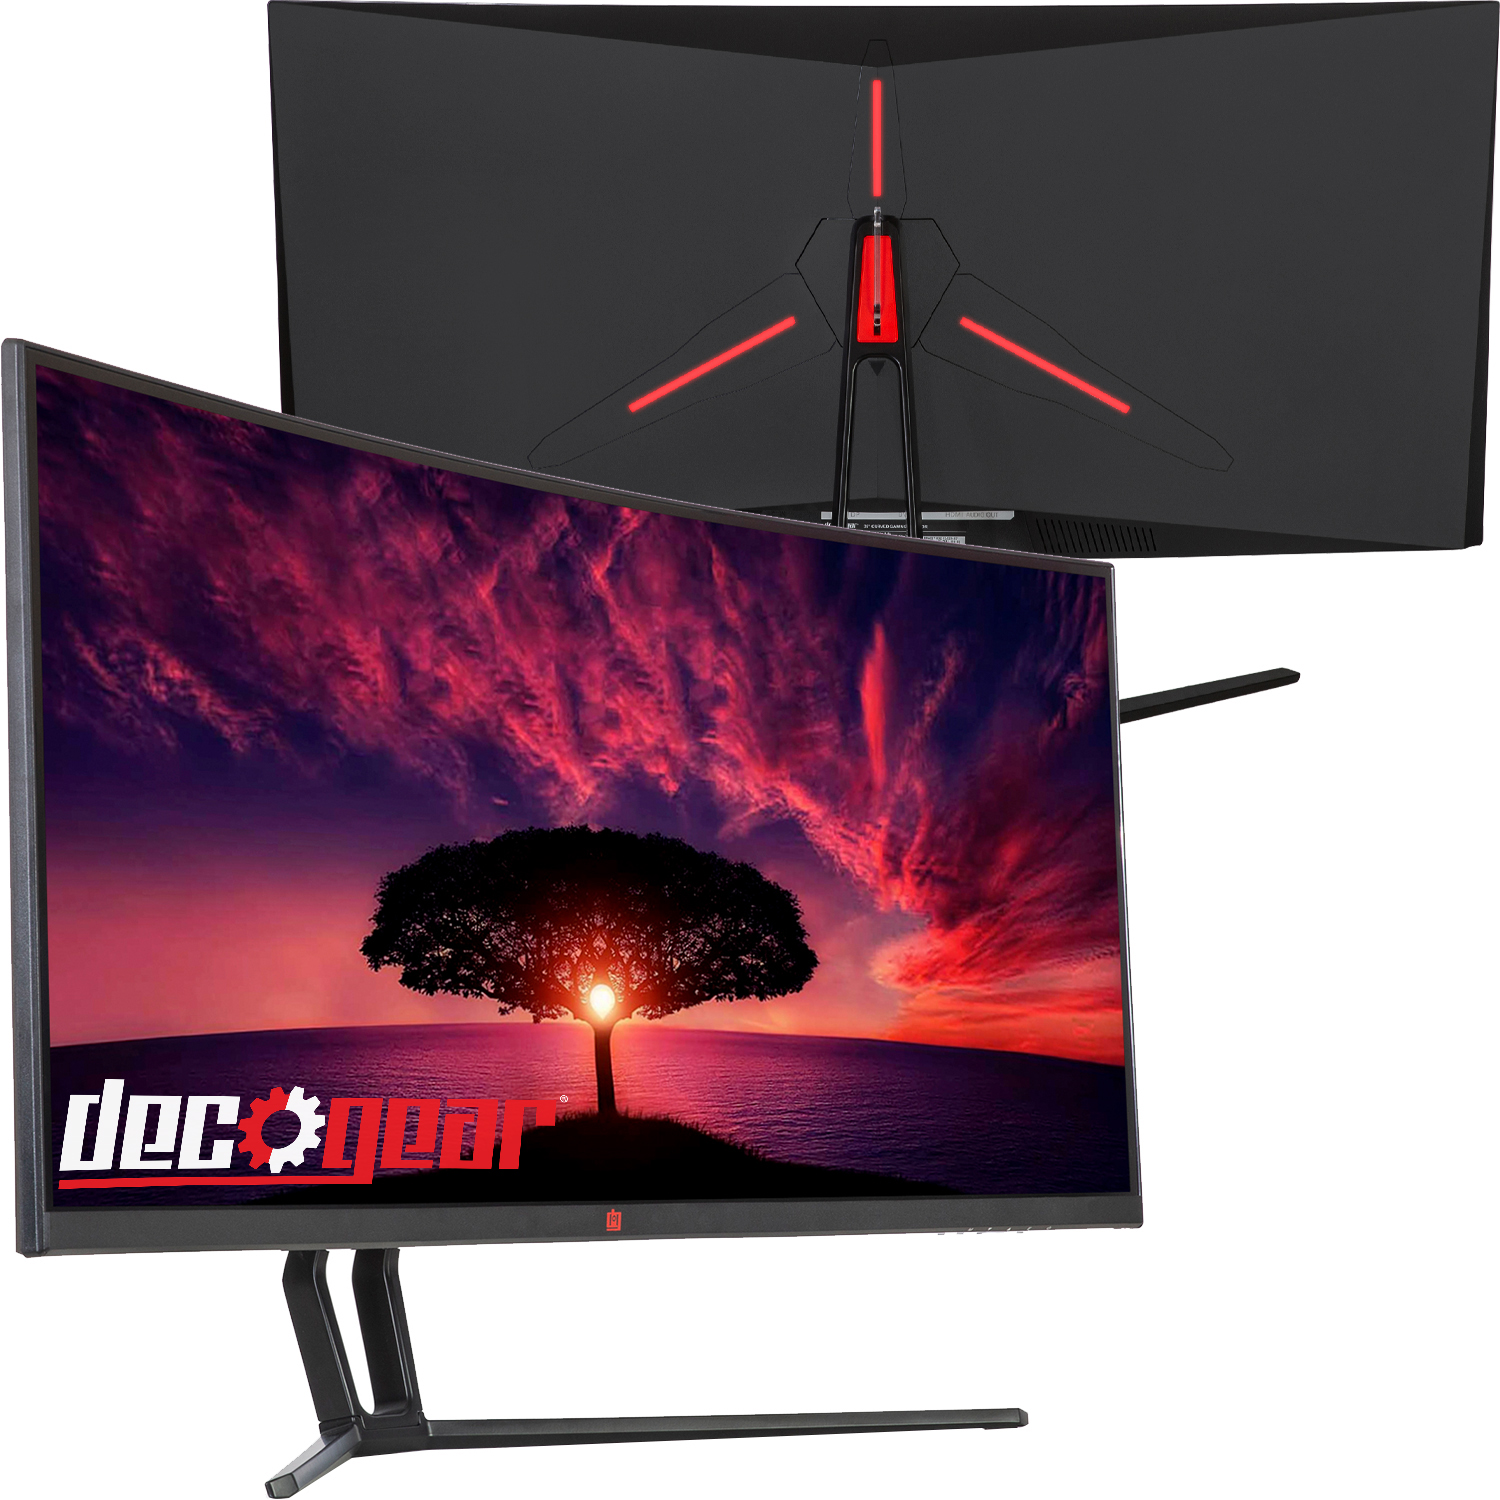 Deco Gear DGVIEW101 - LED monitor - curved - 35" - 2560 x 1080 UWFHD @ 75 Hz - 366.8 cd/m������ - 2000:1 - 4 ms - HDMI, DVI, DisplayPort - image 1 of 15